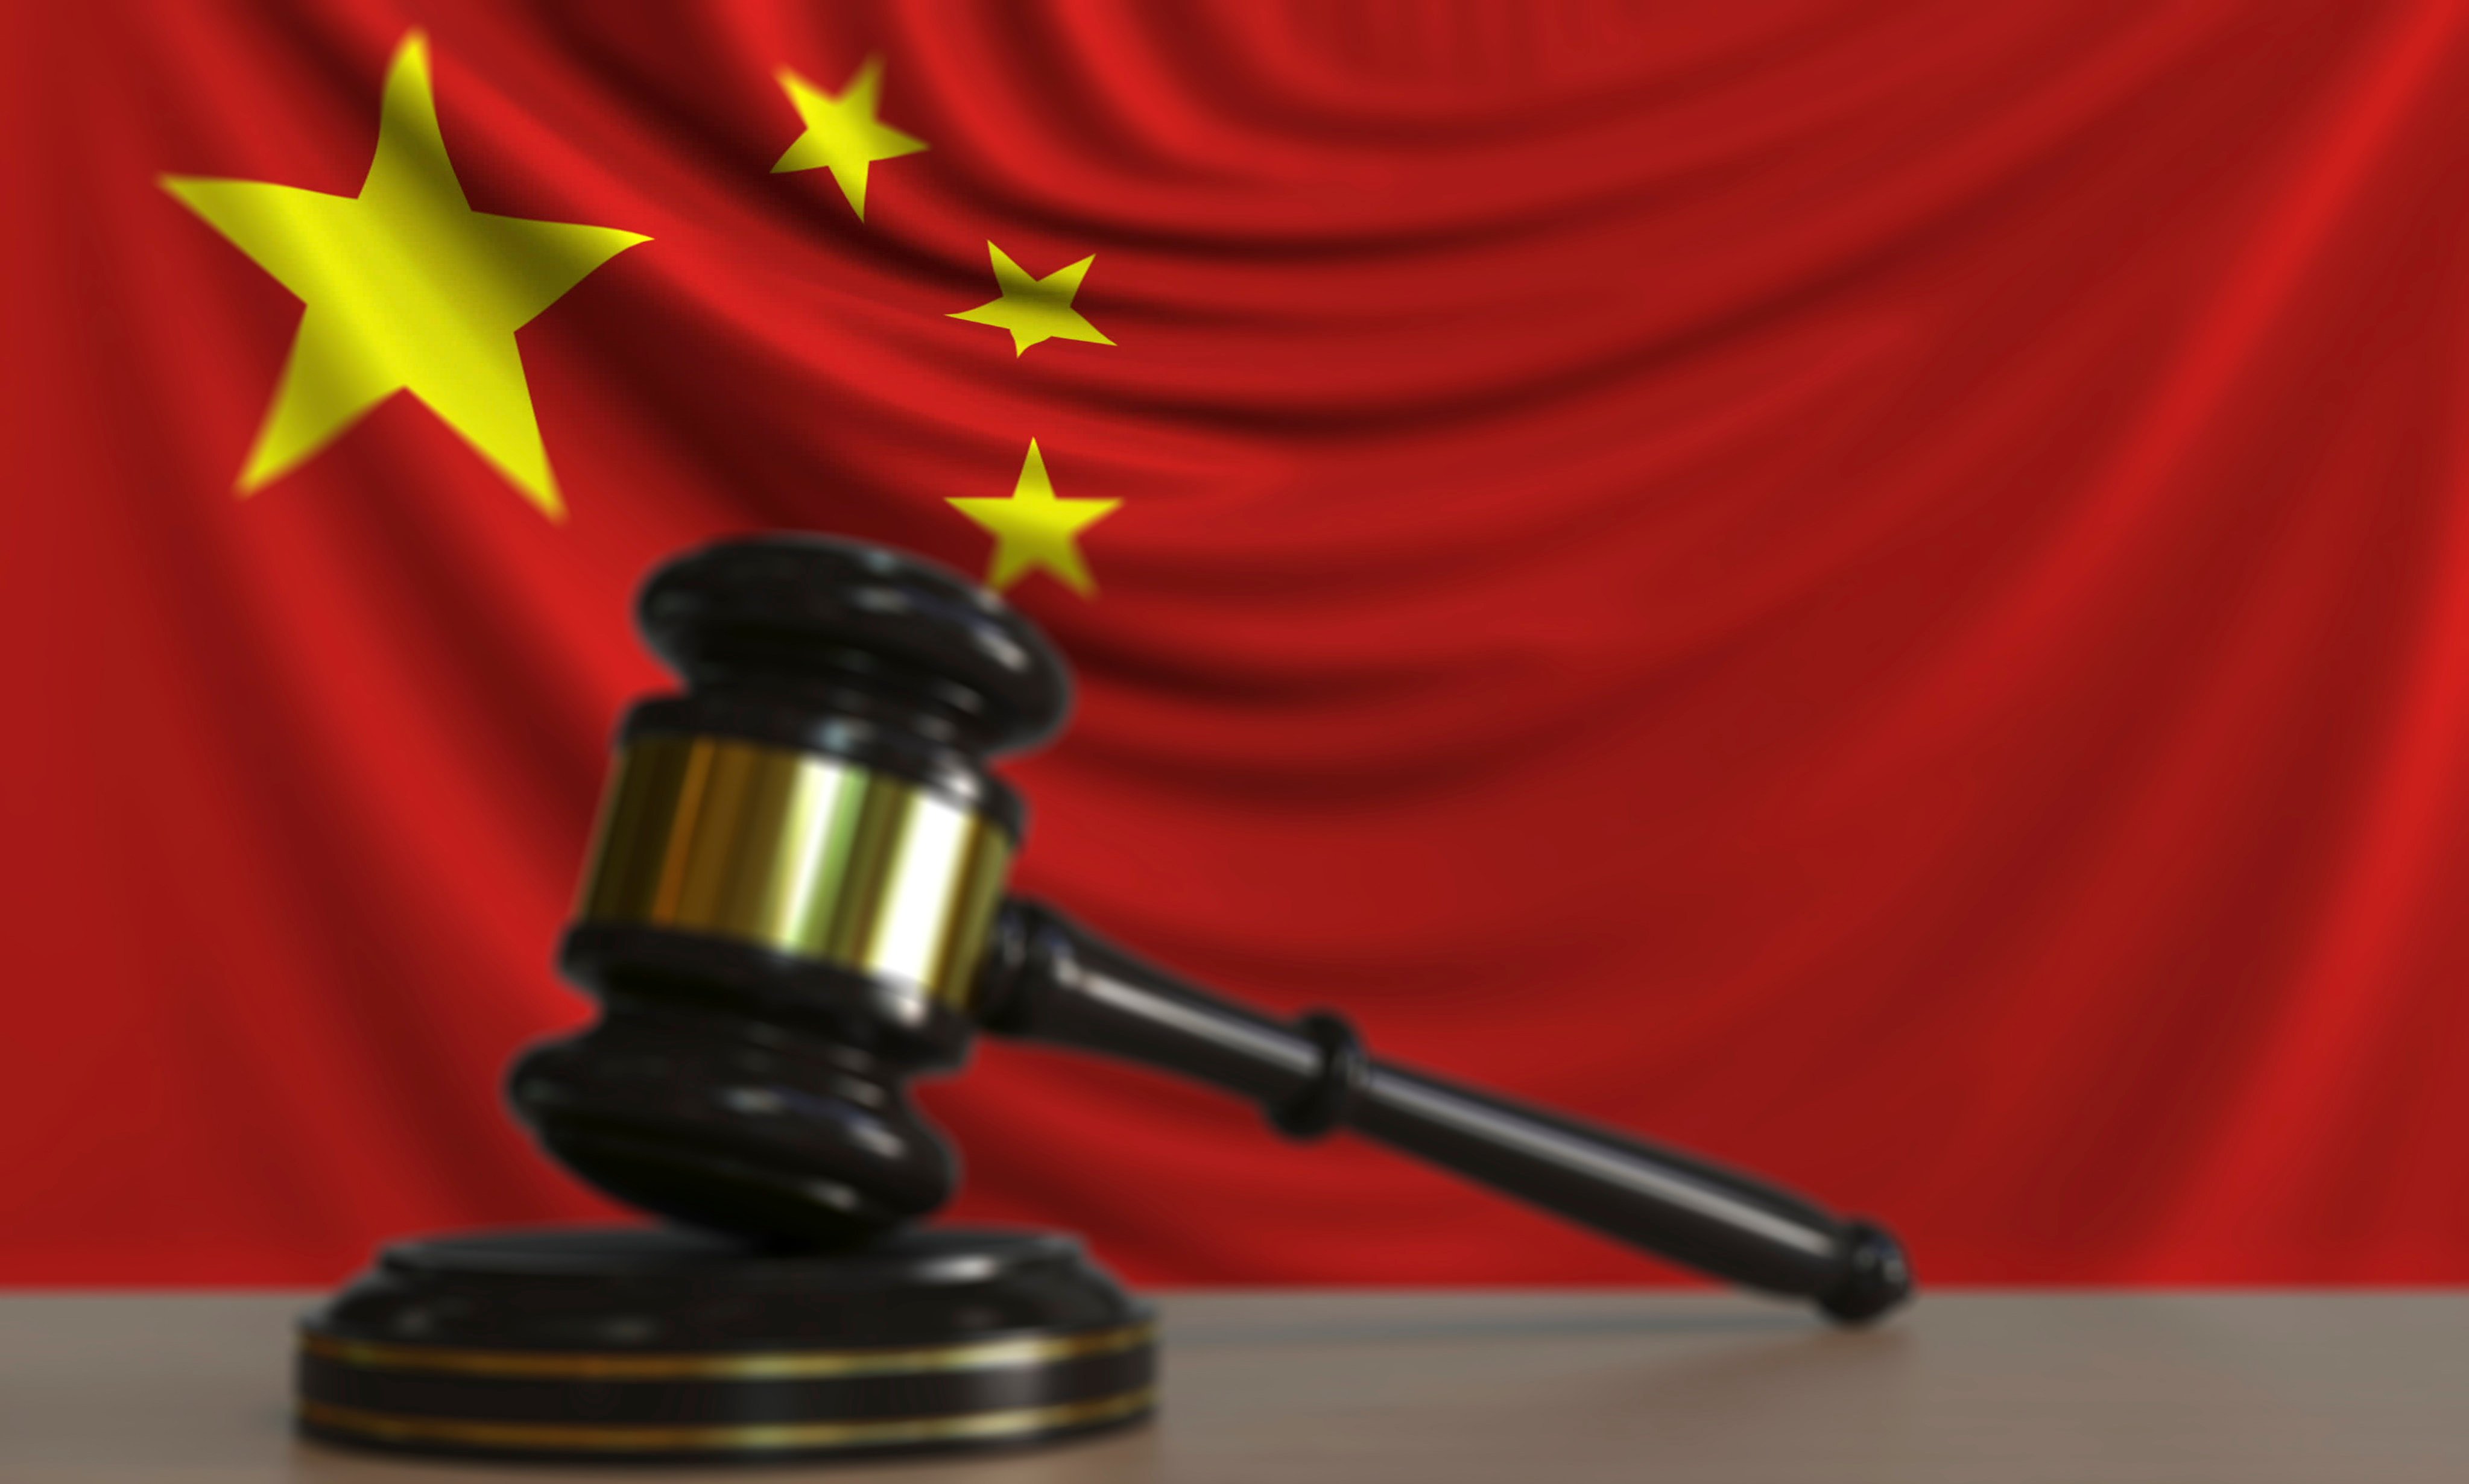 China’s courts have drastically reduced the number of decisions they have uploaded to a public database in recent years. Photo: Shutterstock